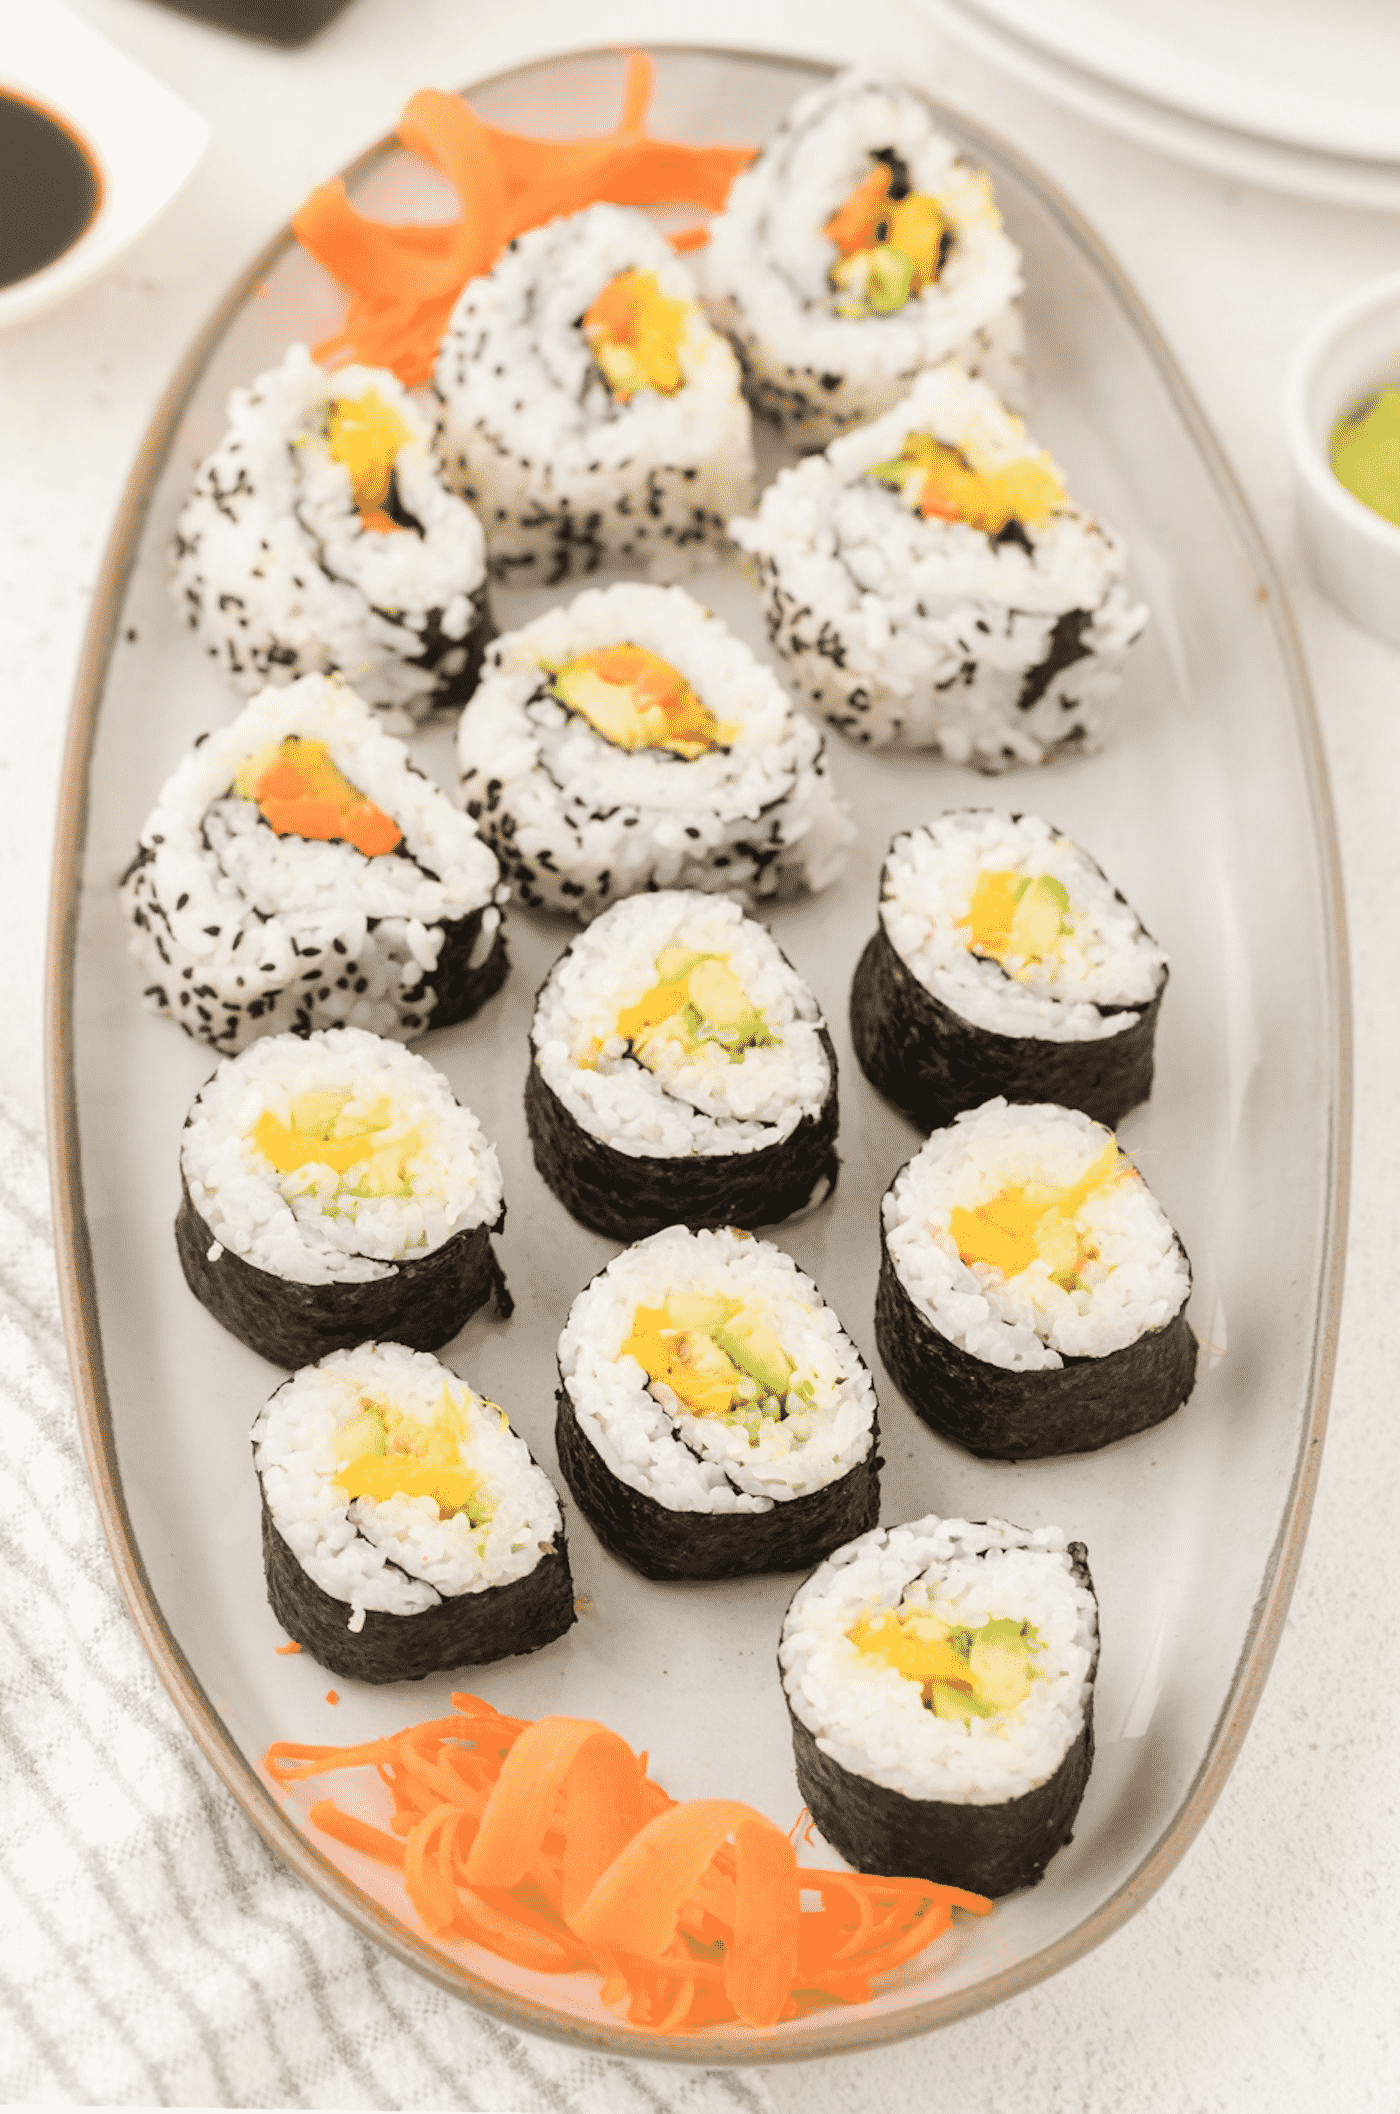 Perfect Instant Pot Sushi Rice